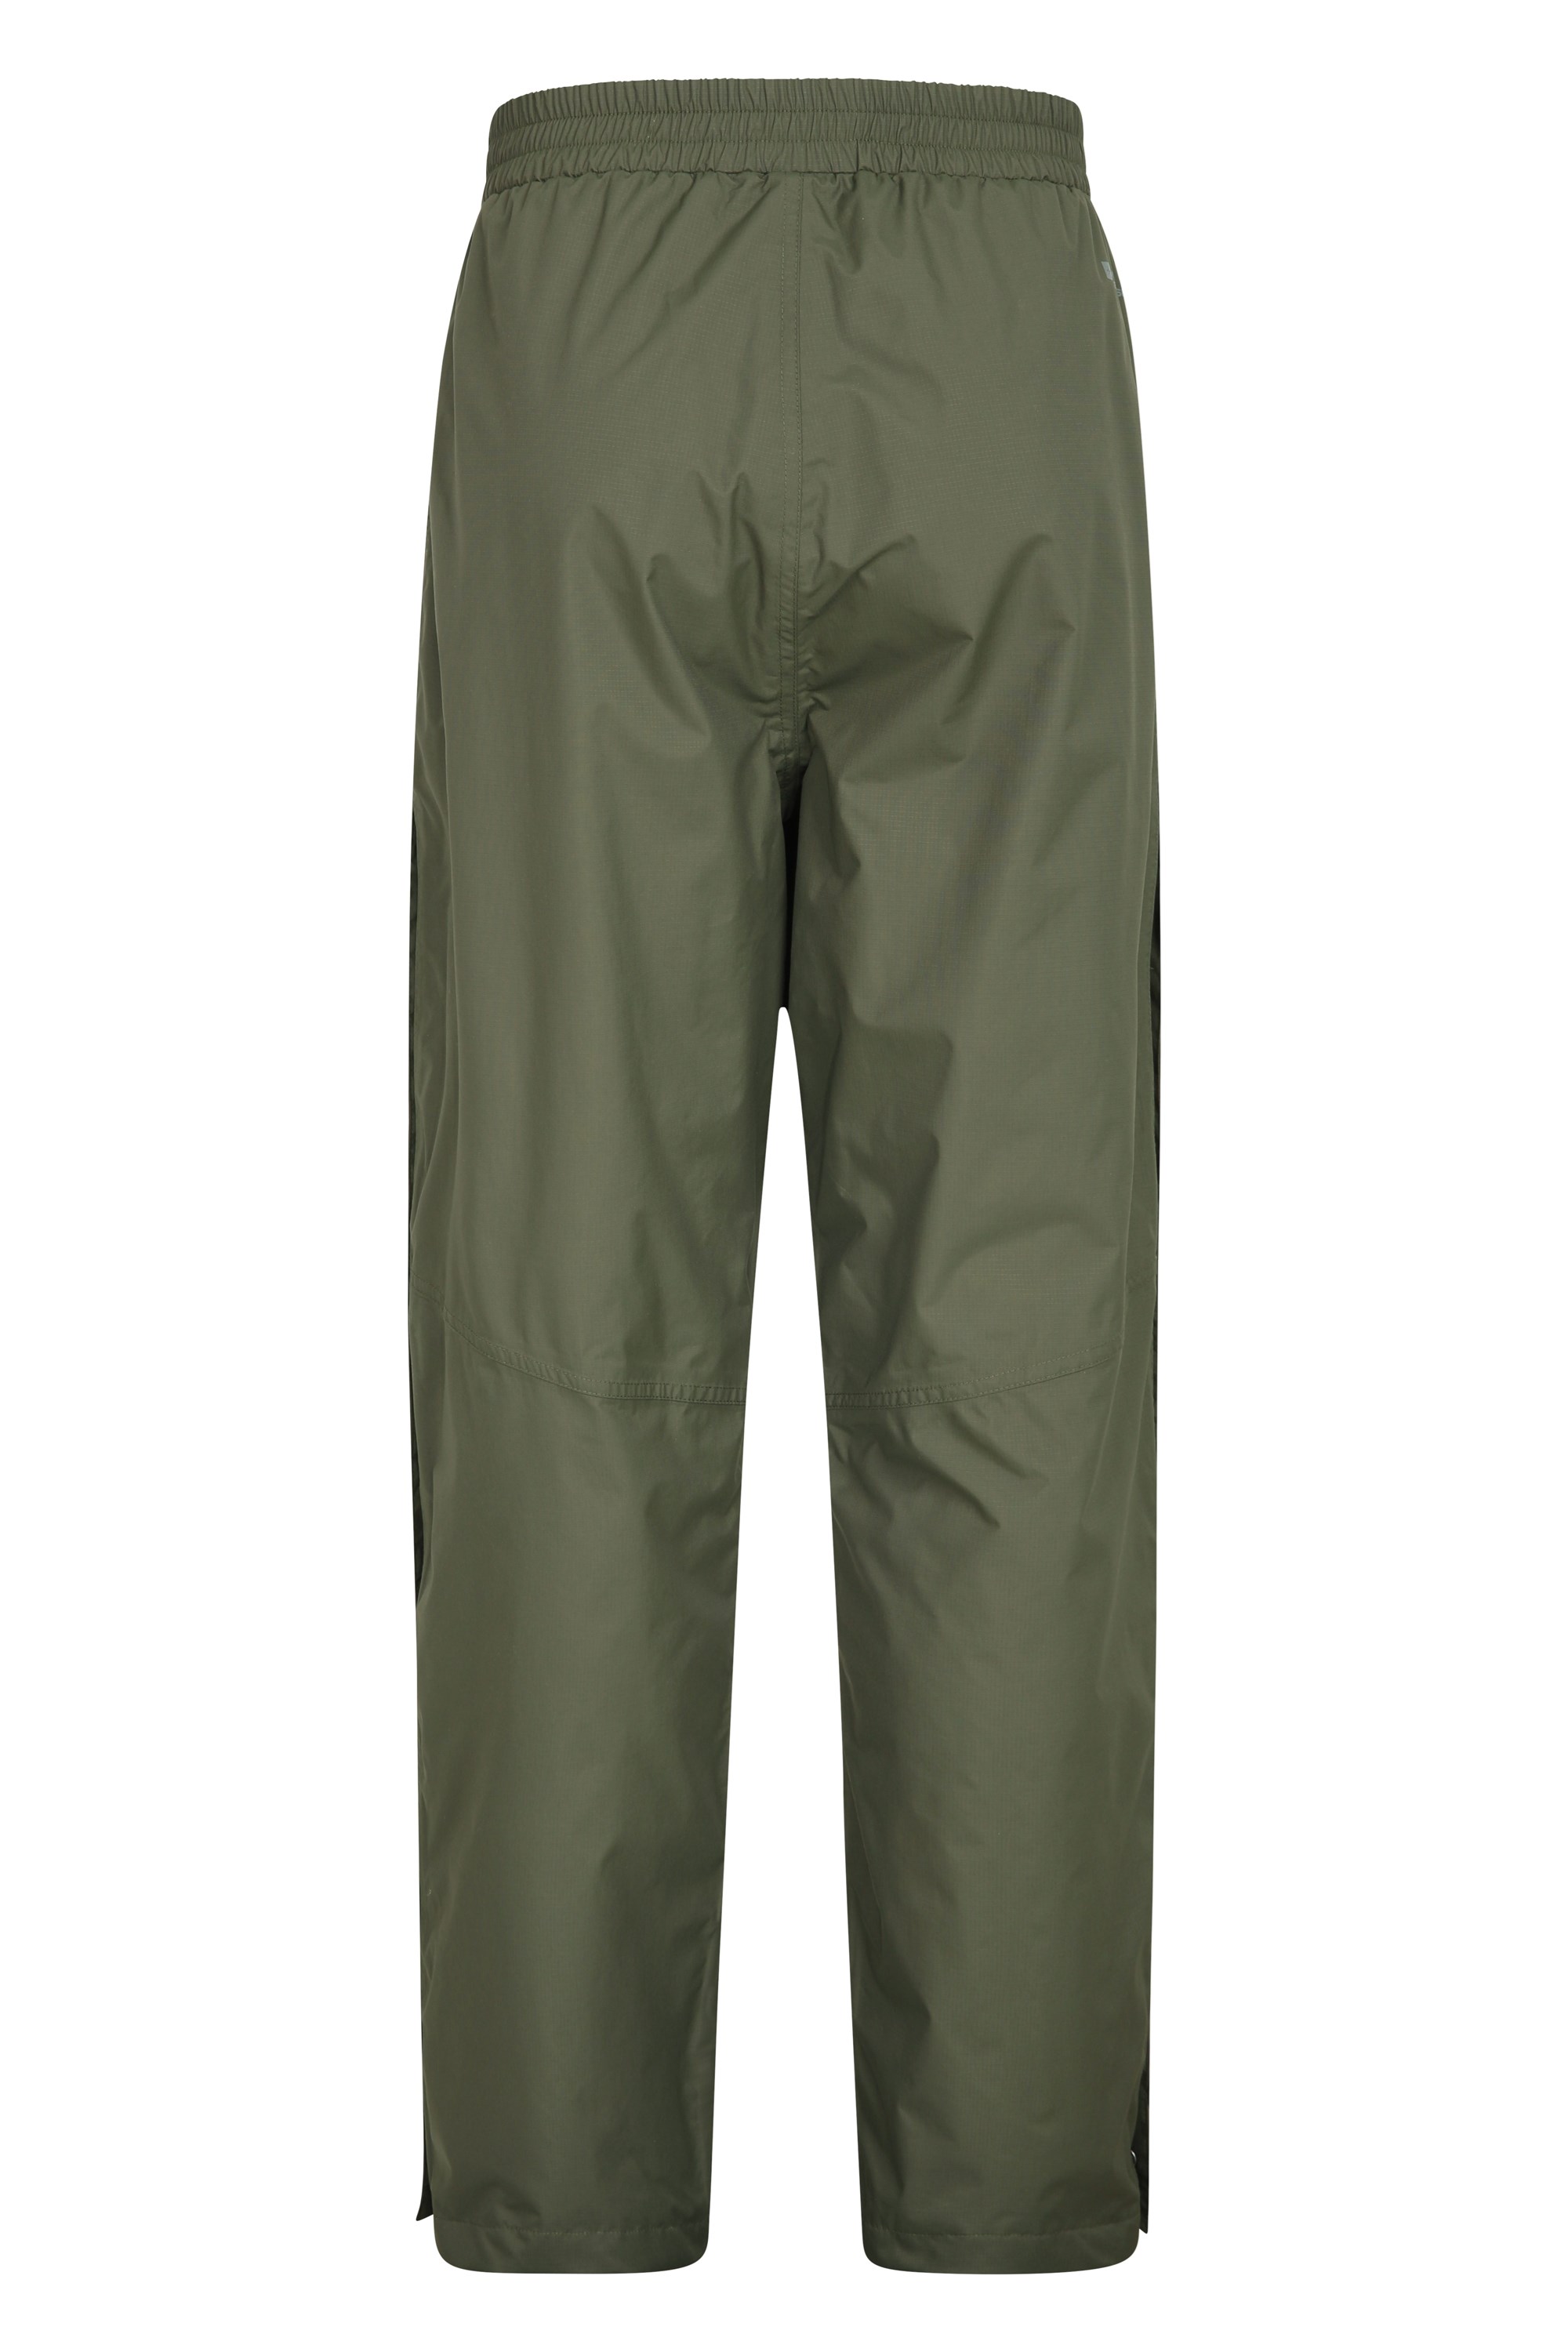 Mountain Warehouse Extreme Downpour Overtrousers with Regular Length 